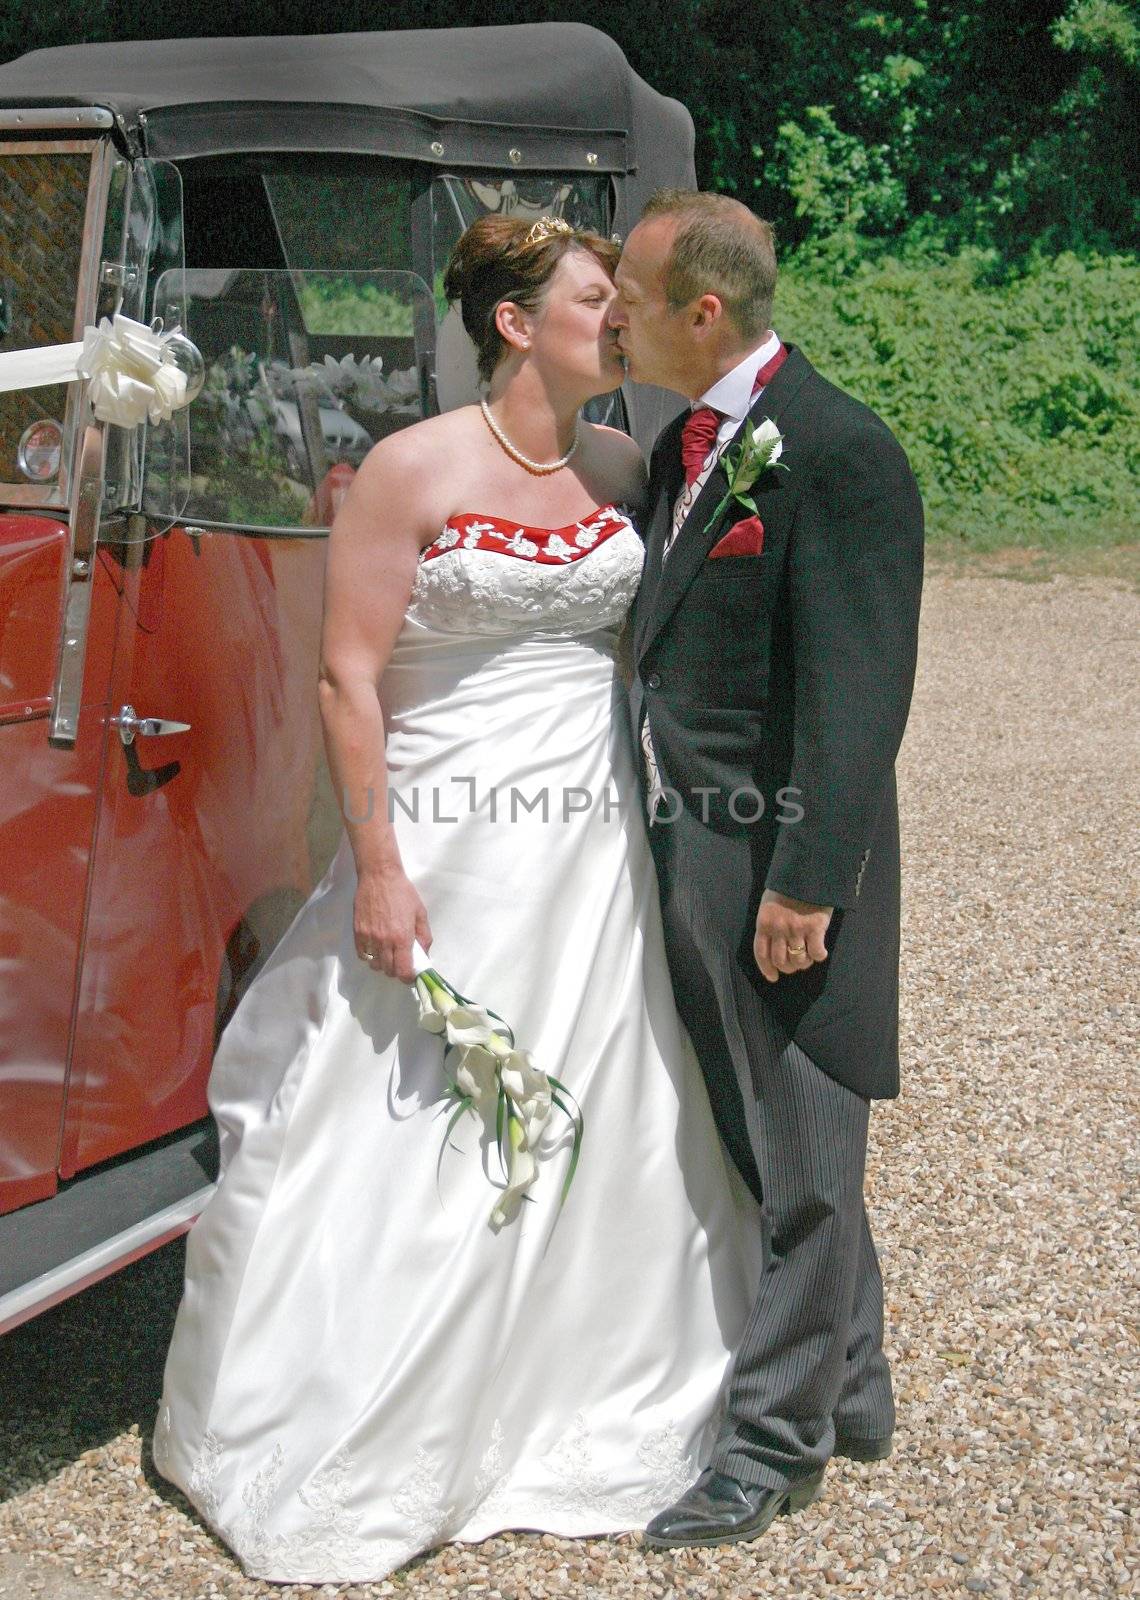 Kissing in front of Wedding Car by quackersnaps